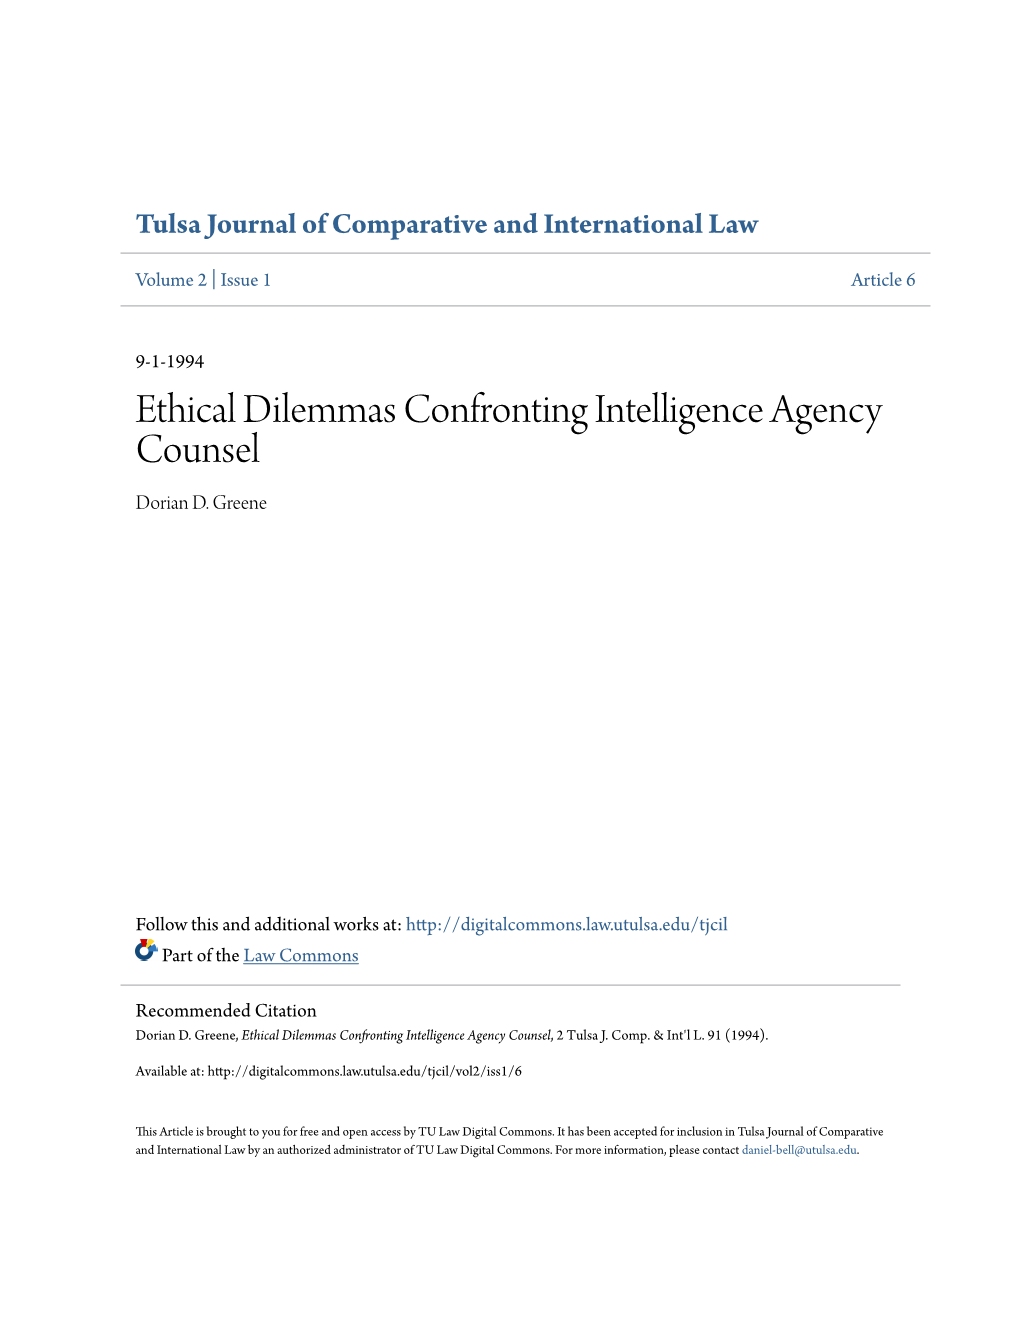 Ethical Dilemmas Confronting Intelligence Agency Counsel Dorian D